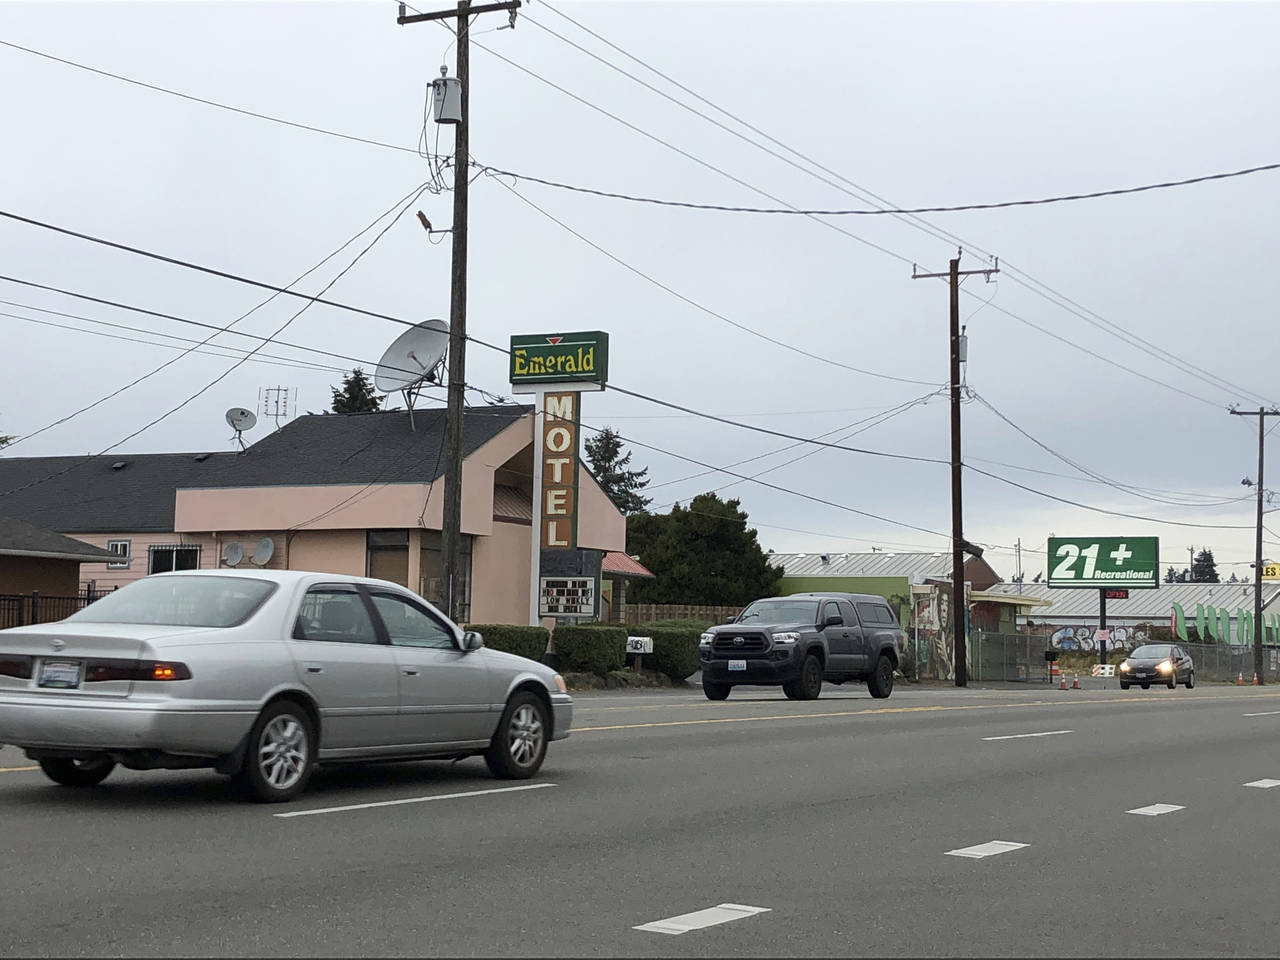 Cars drive by the Emerald Motel in North Seattle on Friday, Nov. 11, 2022. Prosecutors say a 20-yea...